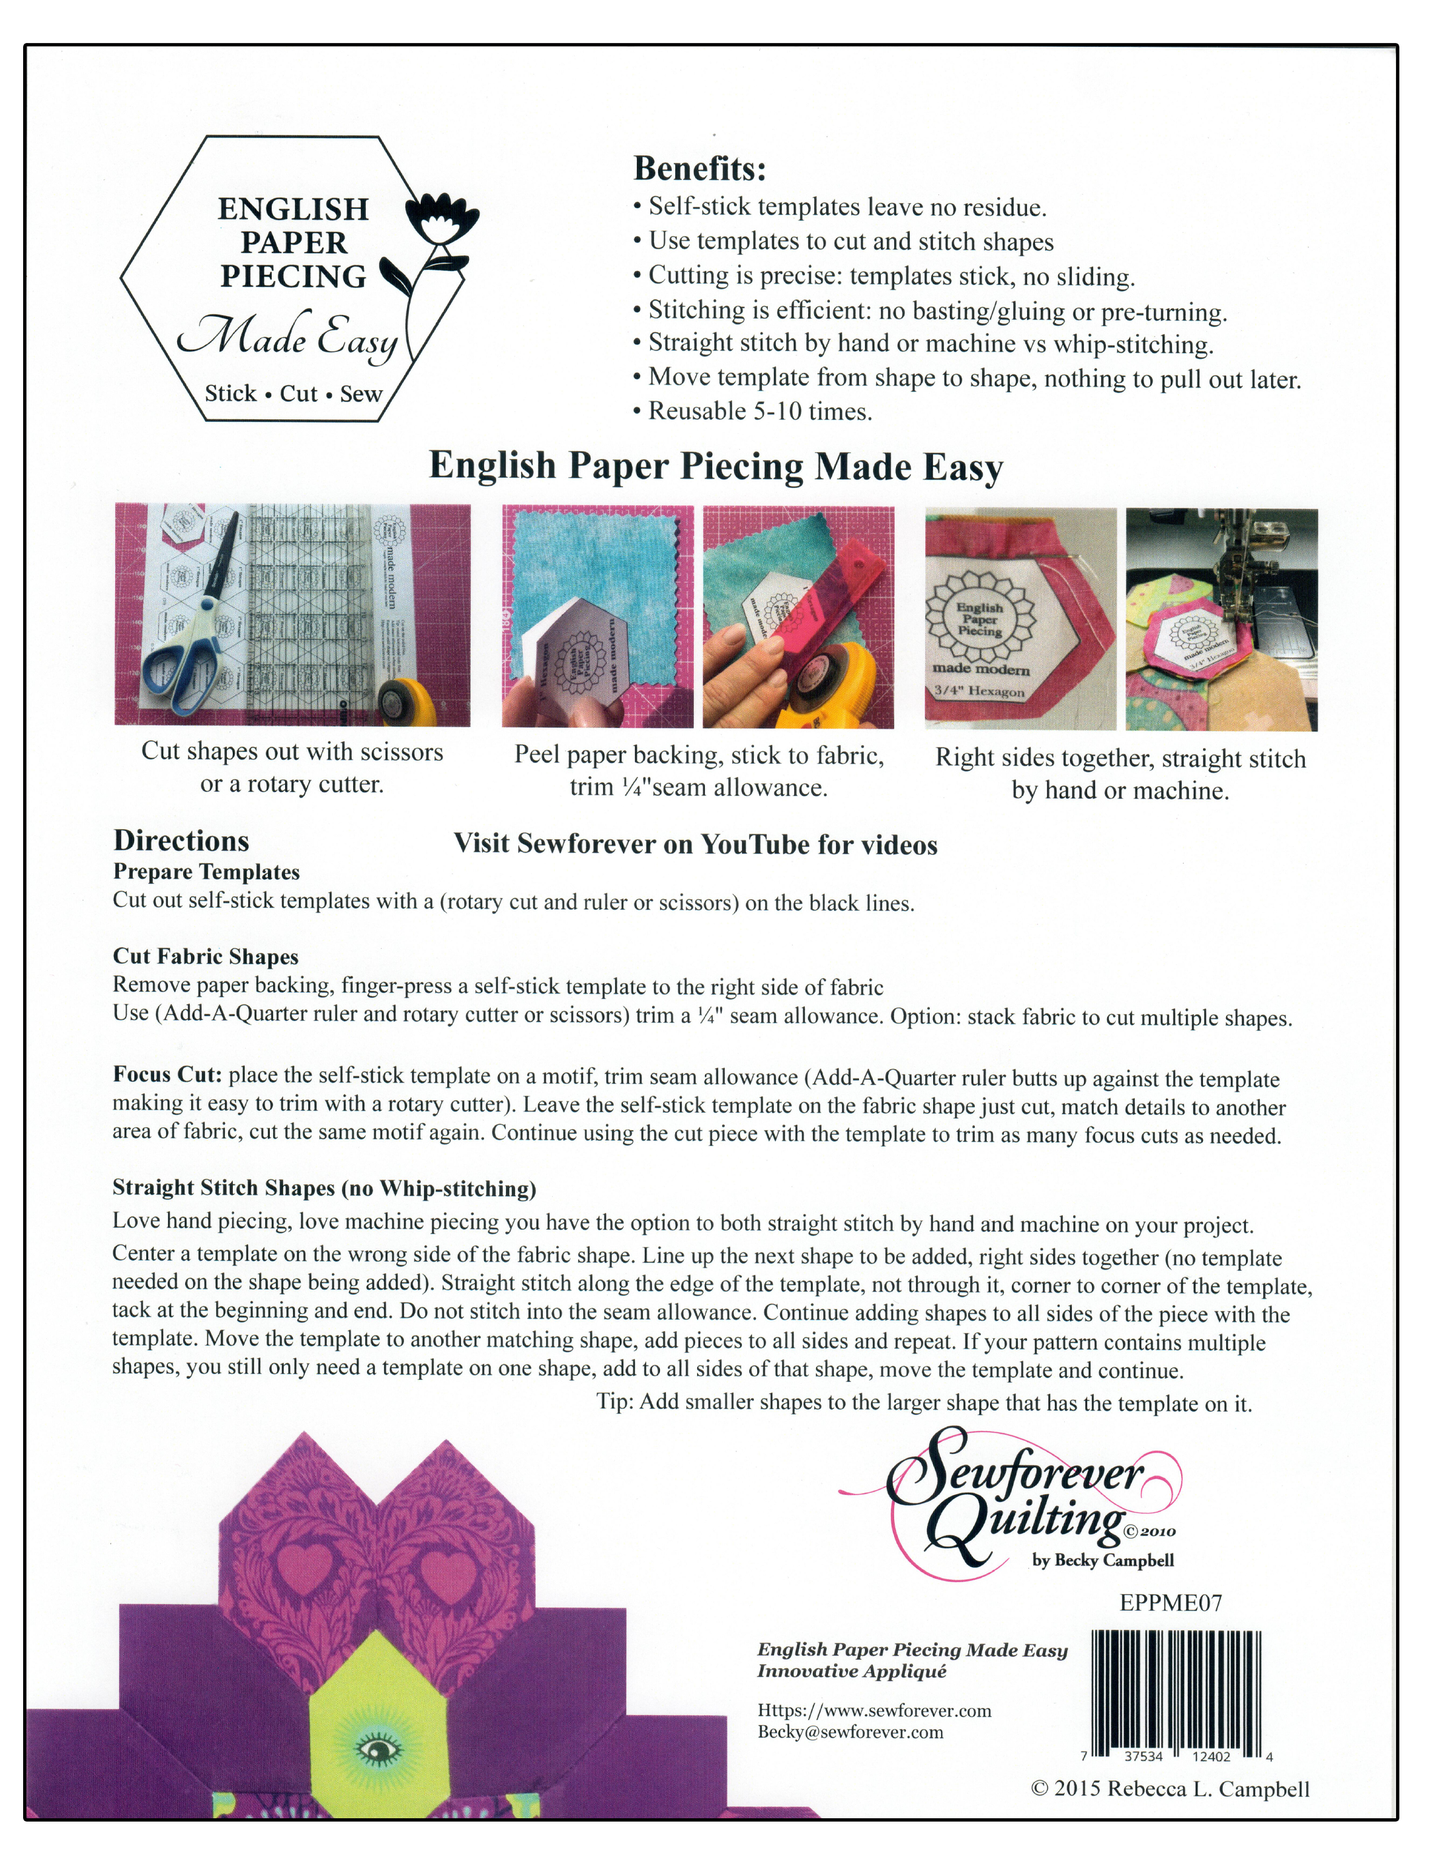 English Paper Piecing Made Easy,  Self-stick Templates.  No basting/gluing, whip-stitching, or pulling paper.  Just move the sticker from shape to shape and straight stitch by hand or machine.  Reusable 5-10 times. 